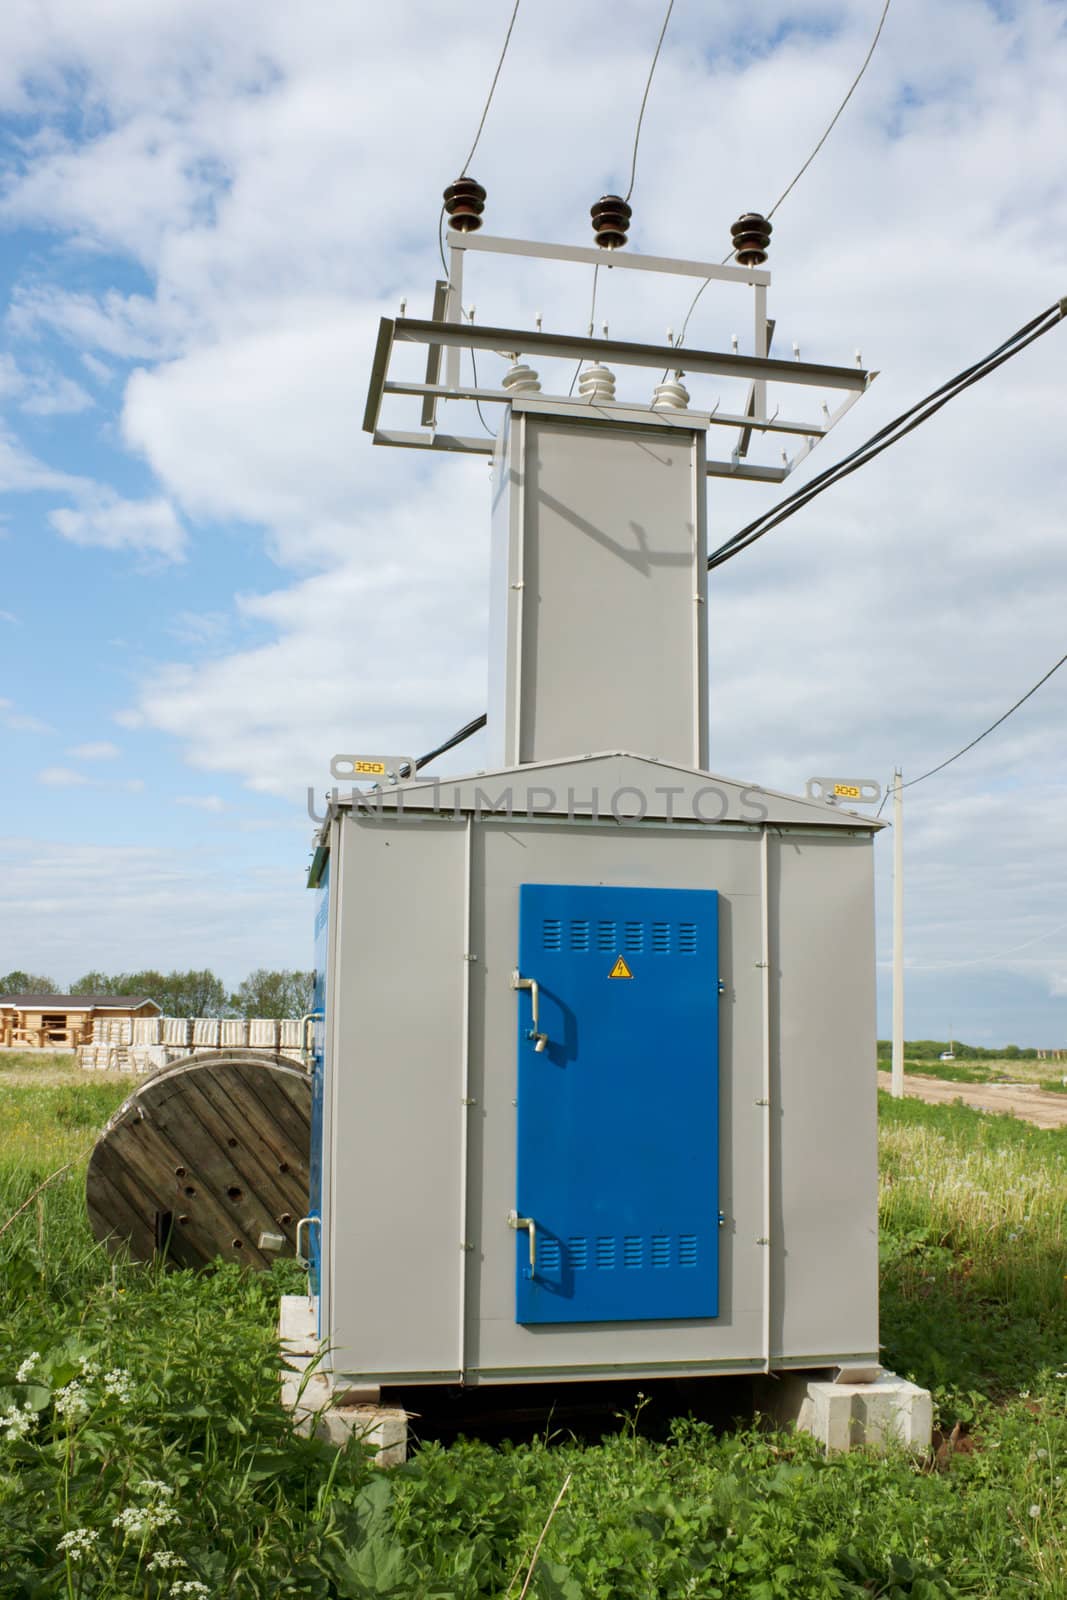 Transformer substation on a meadow in countryside